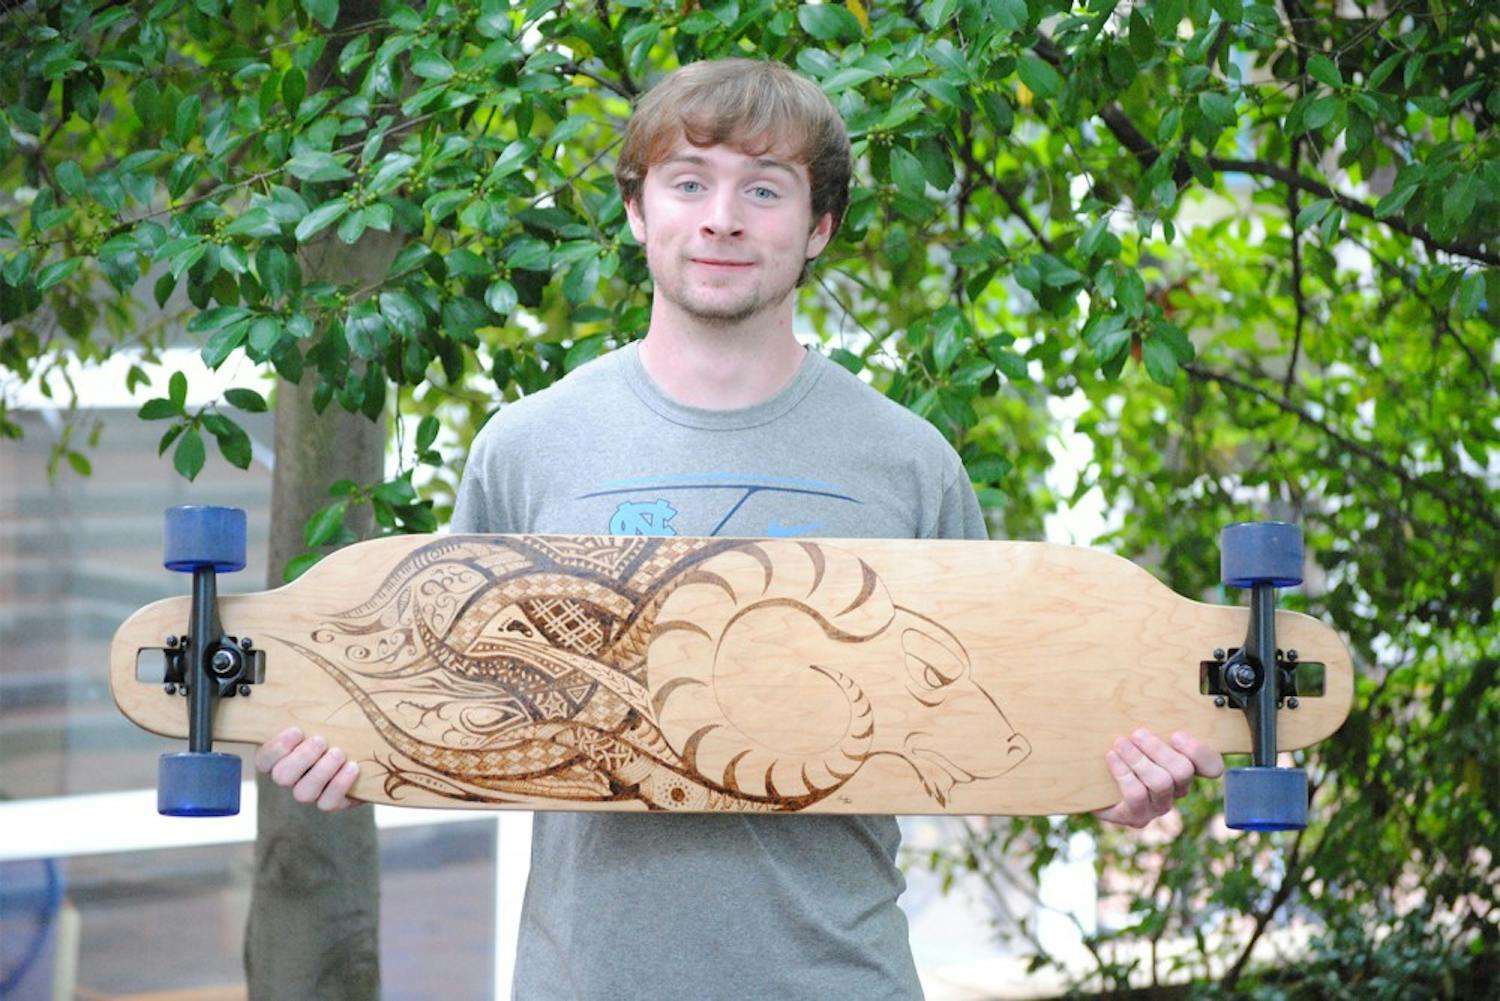 Sophomore Brandon Clark expresses his school pride and interest in art on the bottom of his longboard.